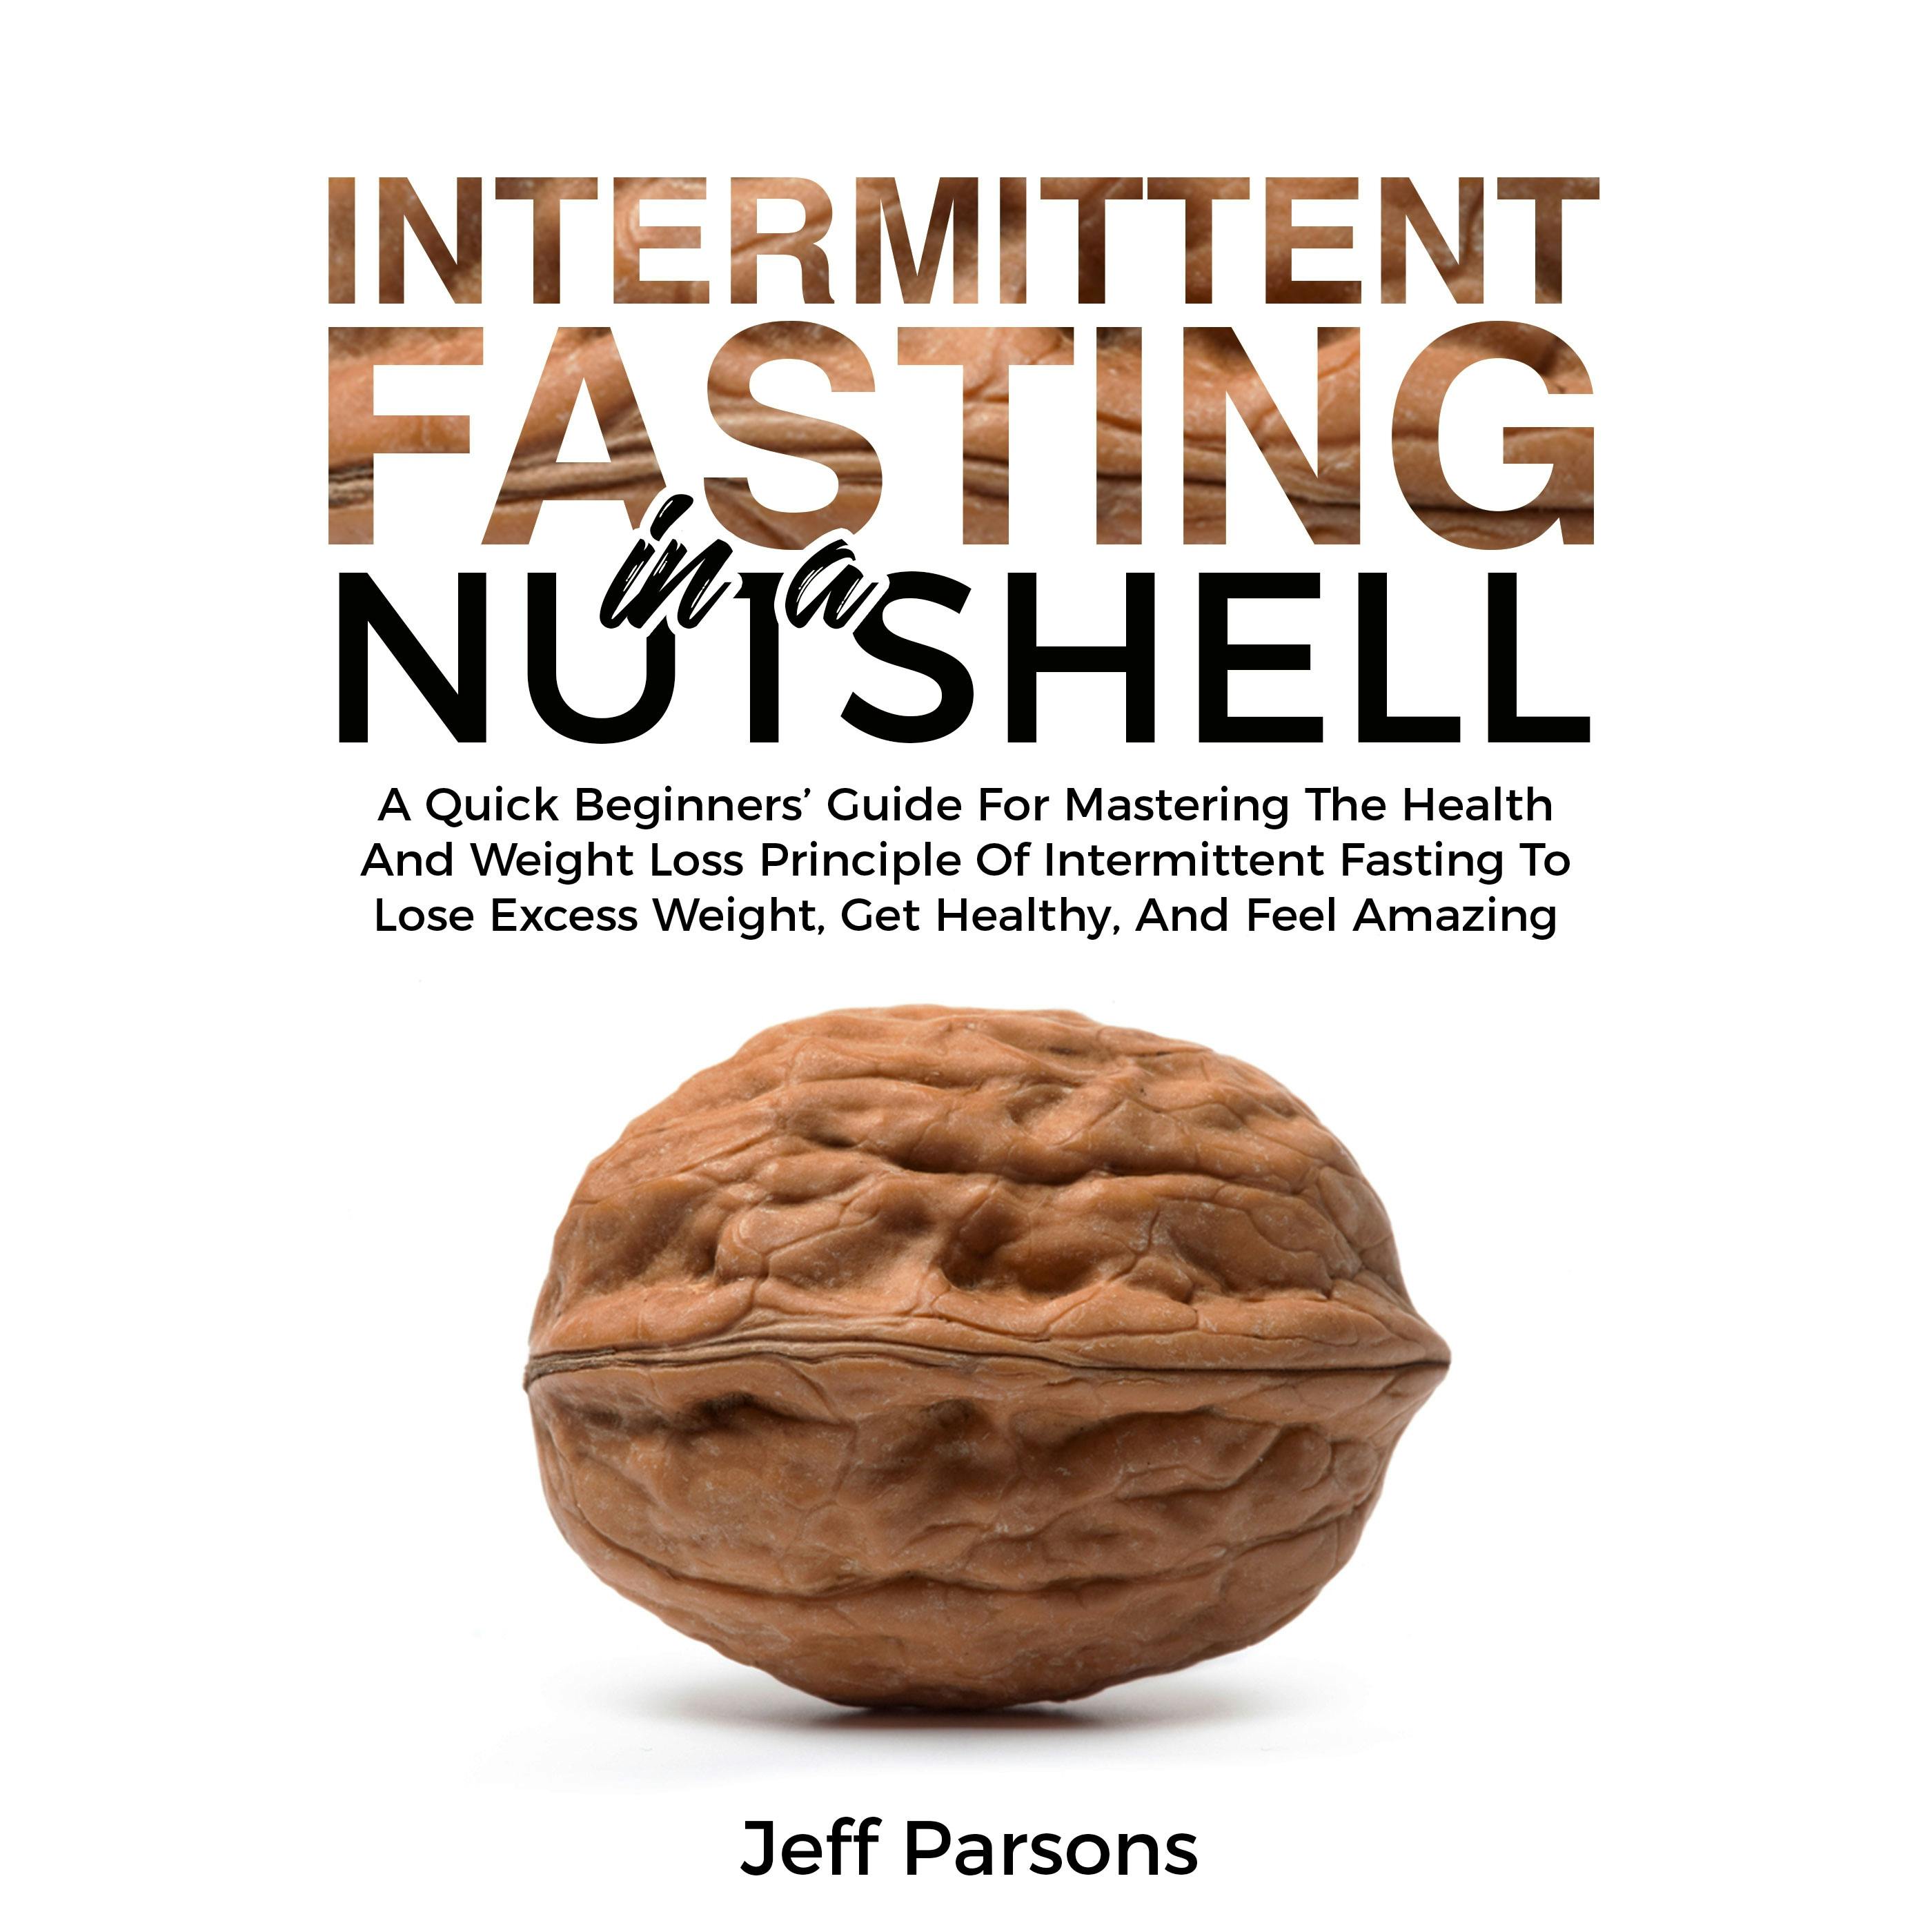 Intermittent Fasting In A Nutshell: A Quick Beginner's Guide For Mastering The Health And Weight Loss Principles Of Intermittent Fasting To Lose Excess Weight, Get Healthy, And Feel Amazing - Jeff Parsons